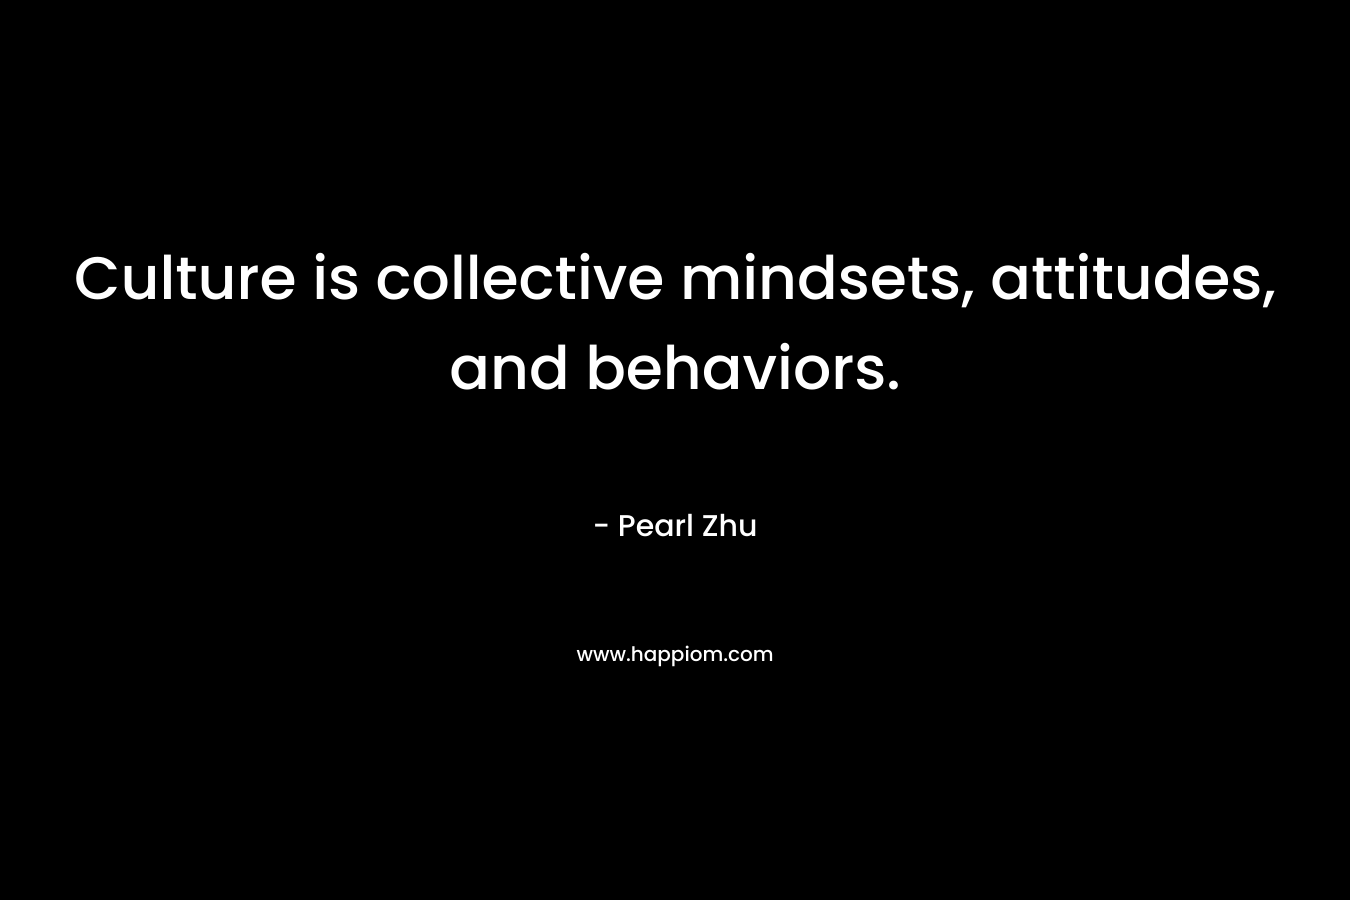 Culture is collective mindsets, attitudes, and behaviors. – Pearl Zhu